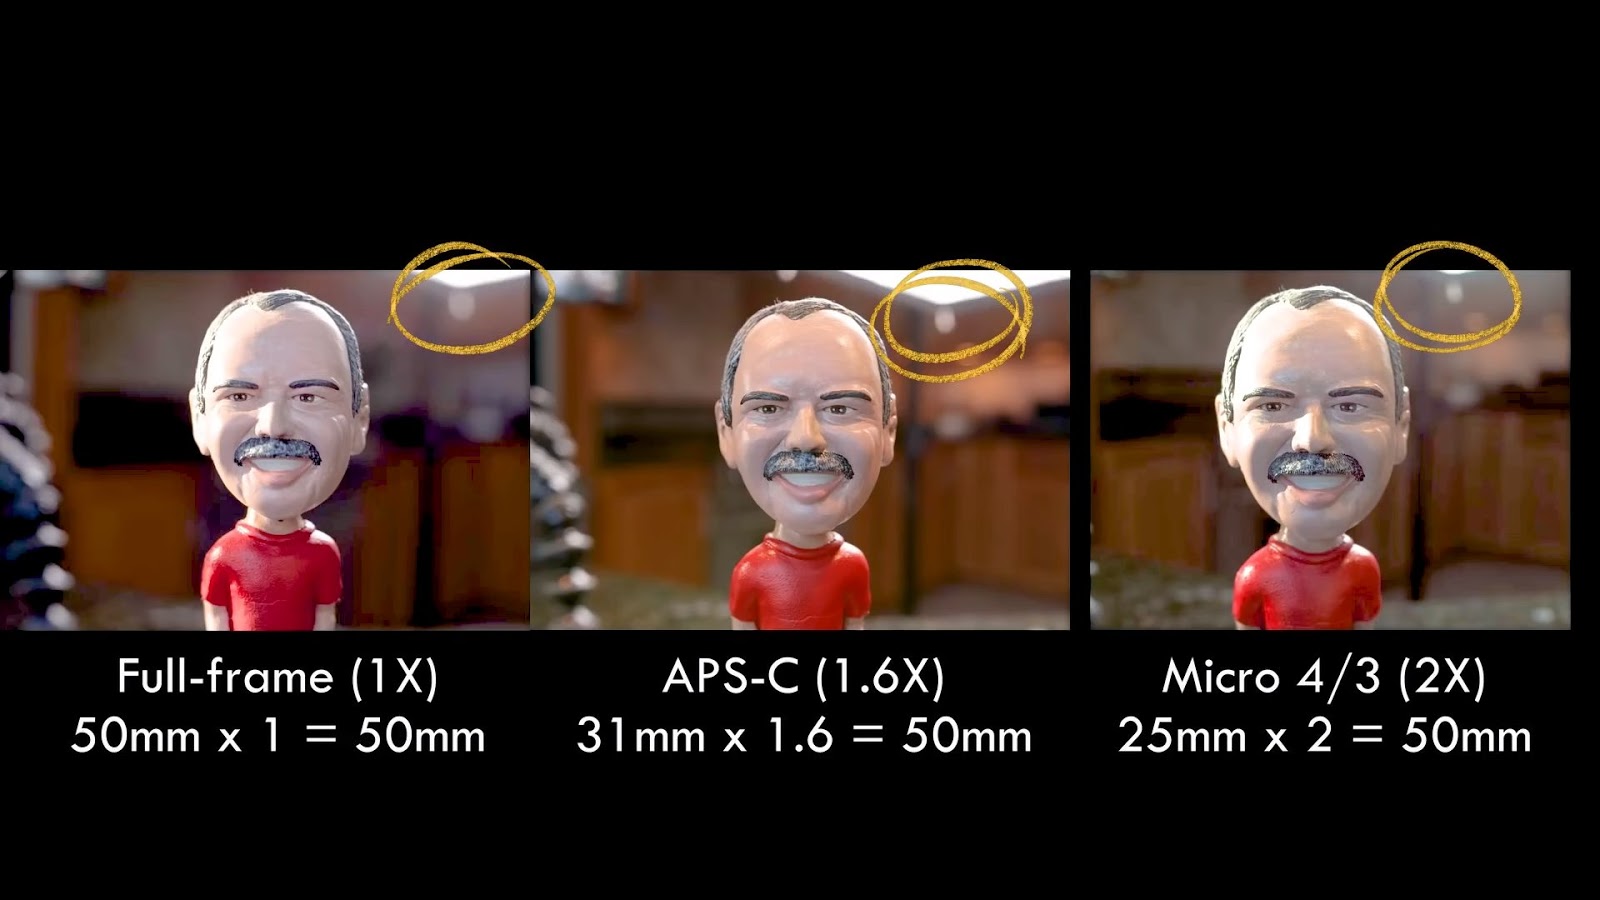 Crop Factor TRUTH: Do you need Full Frame?